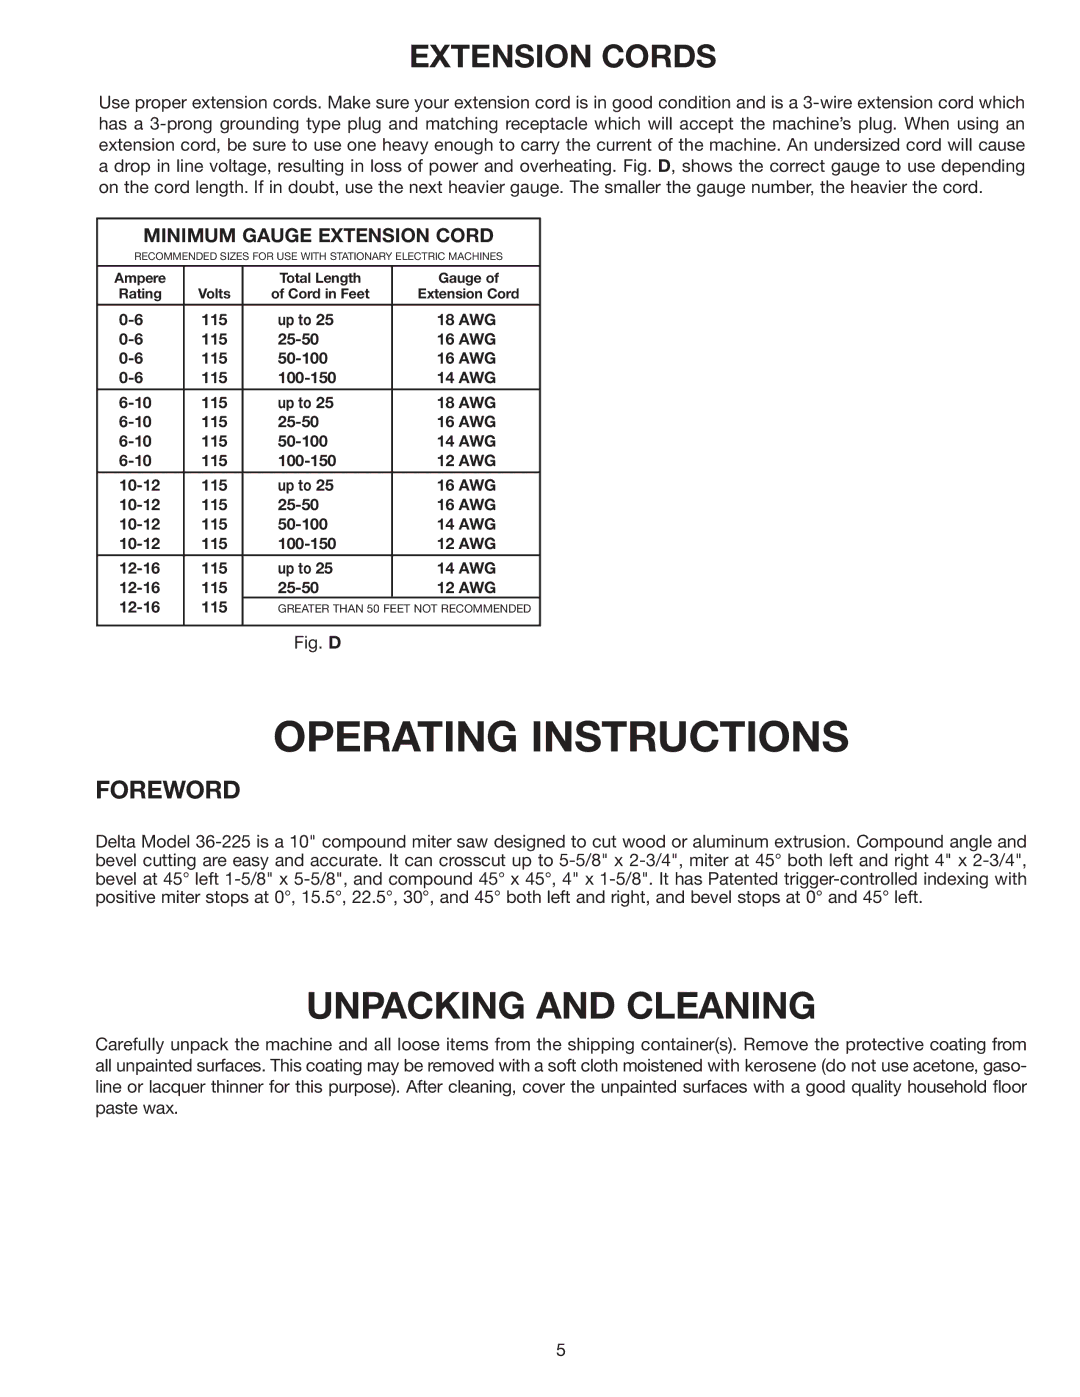 Porter-Cable 36-225 instruction manual Unpacking and Cleaning, Extension Cords 